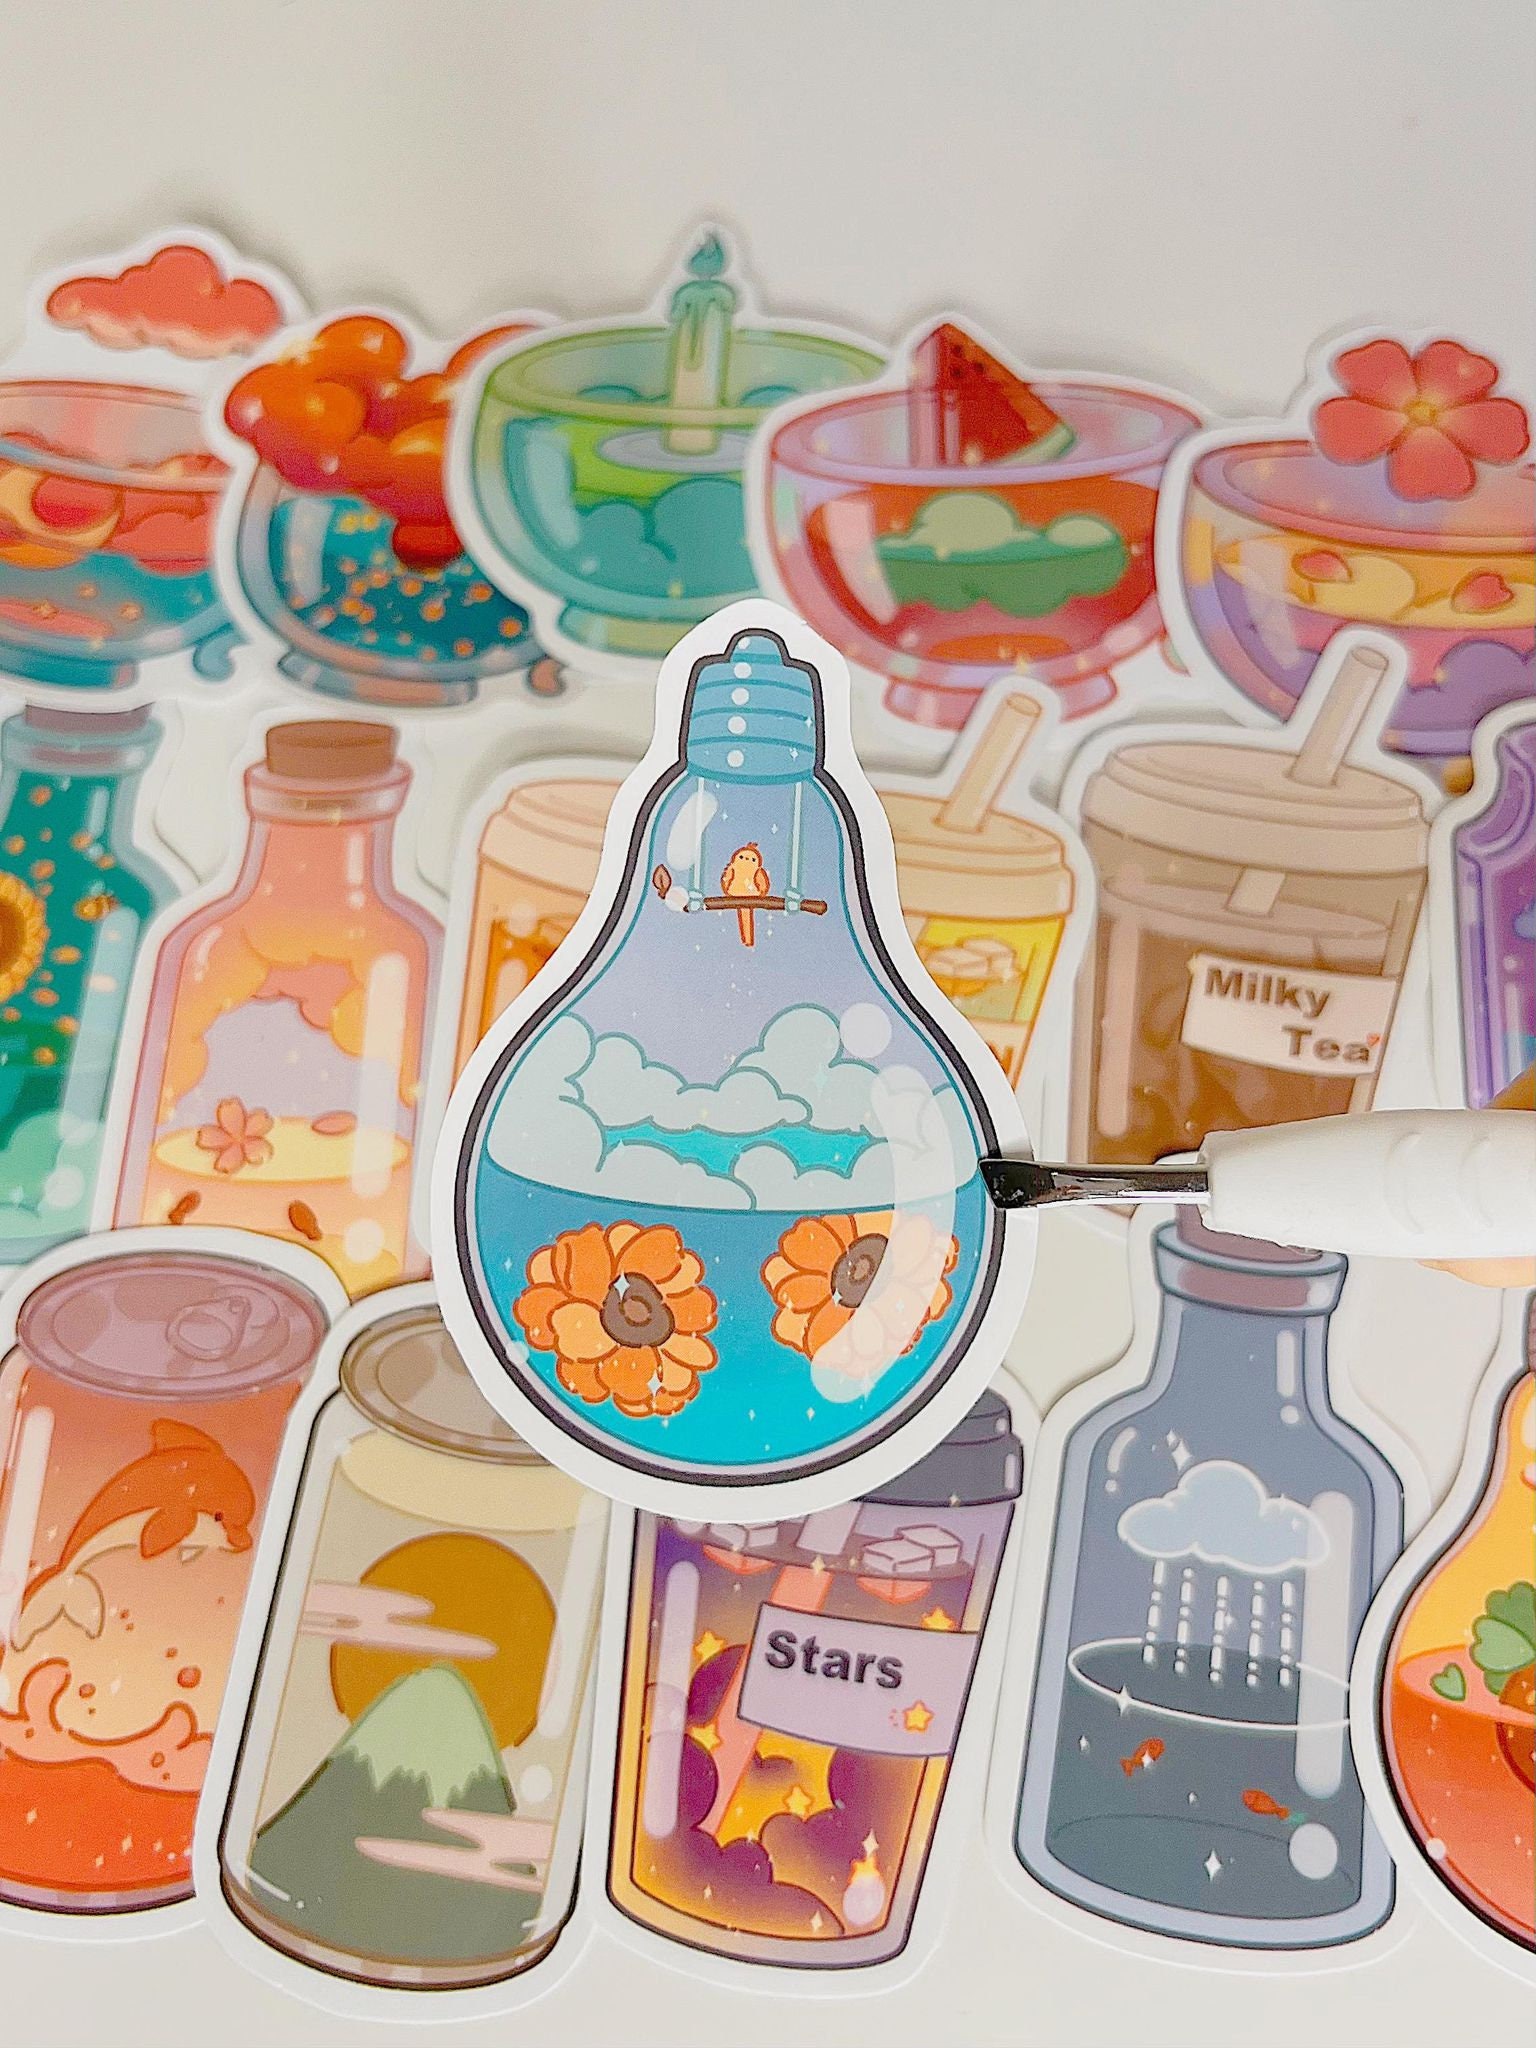 Mystic Bag Cute Aesthetic Drink Sticker Pastel Color Stickers for